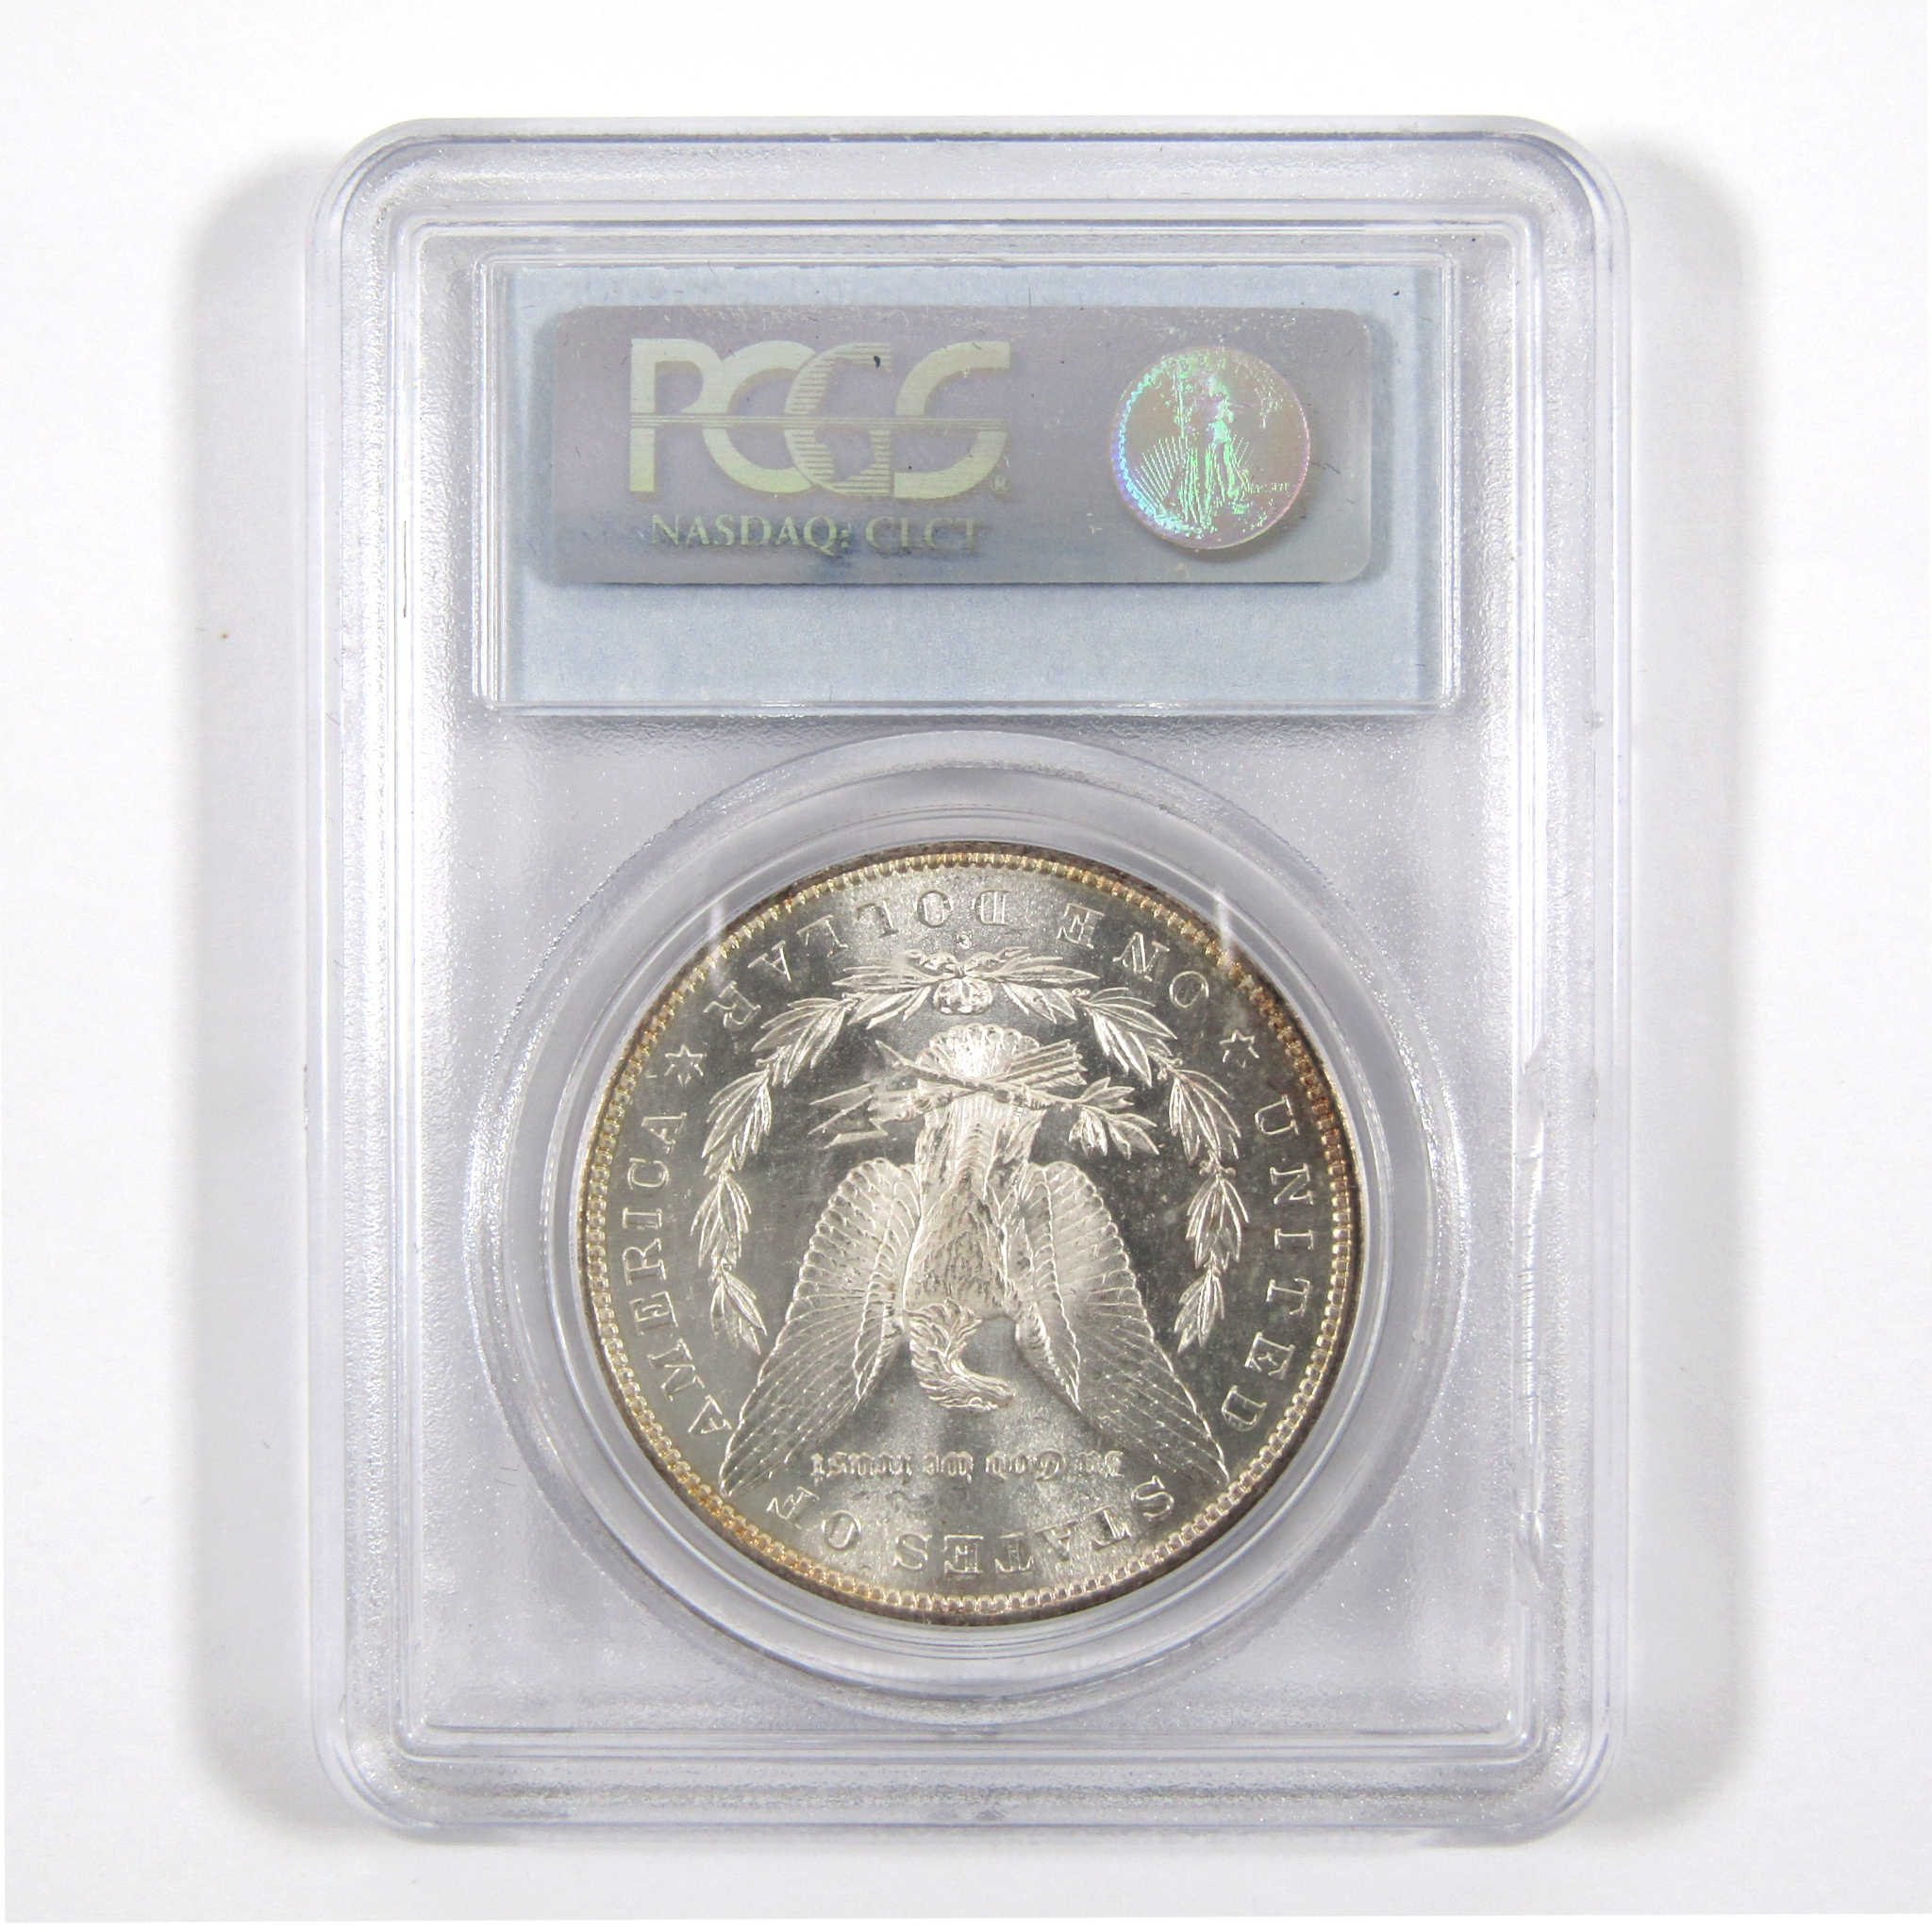 1885 S Morgan Dollar MS 64 PCGS 90% Silver $1 Unc SKU:CPC4002 - Morgan coin - Morgan silver dollar - Morgan silver dollar for sale - Profile Coins &amp; Collectibles